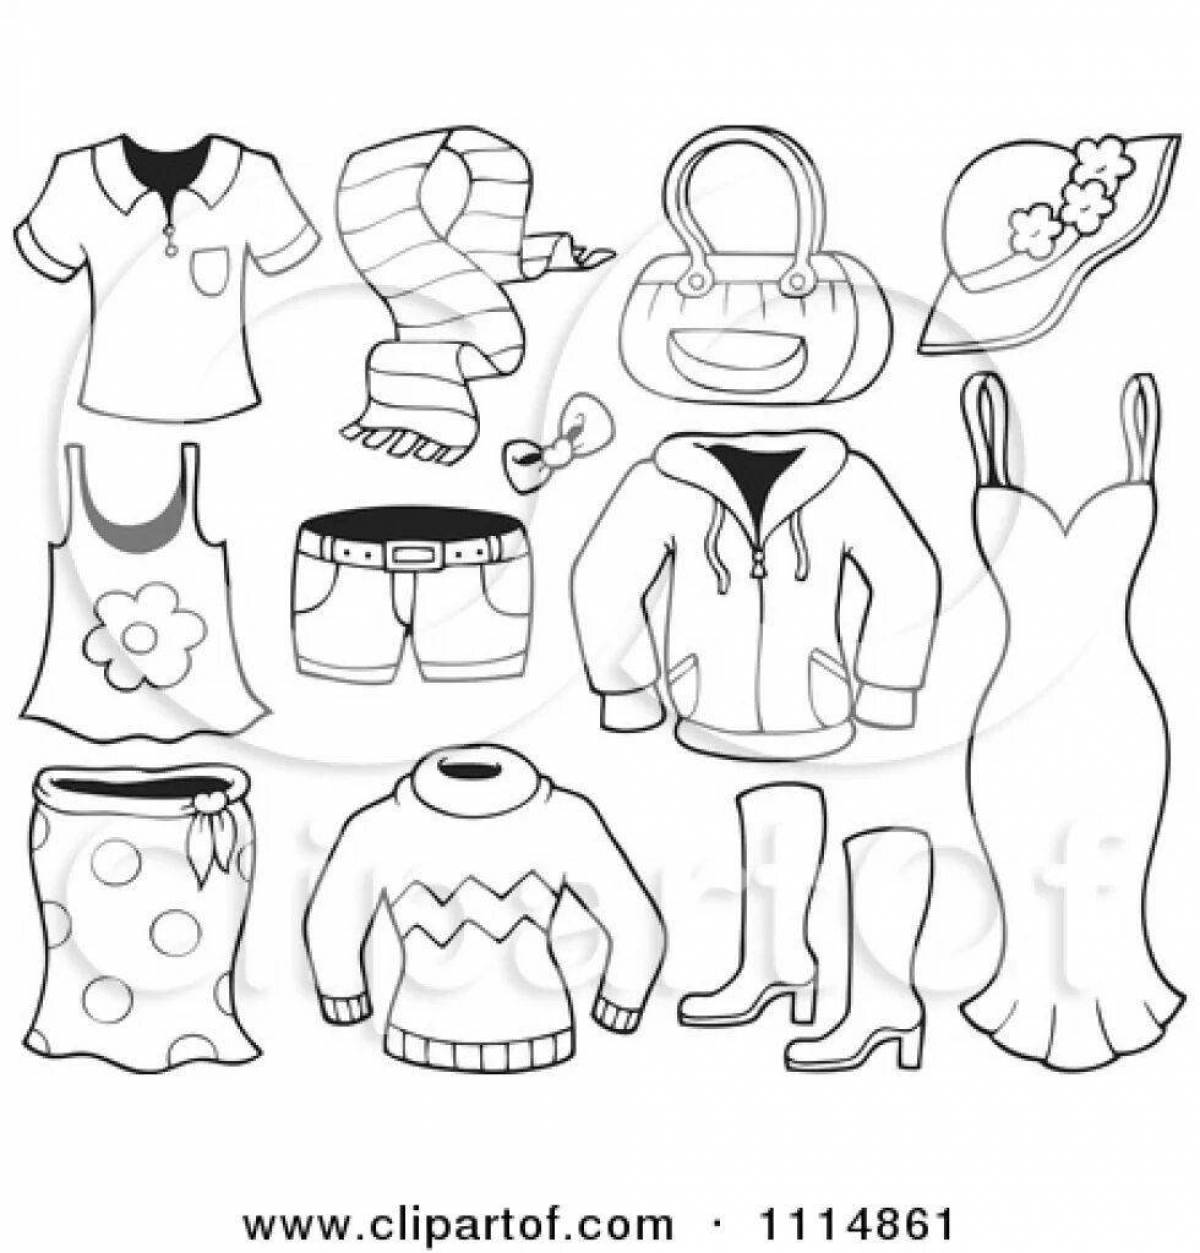 Creative clothing coloring page for 6-7 year olds